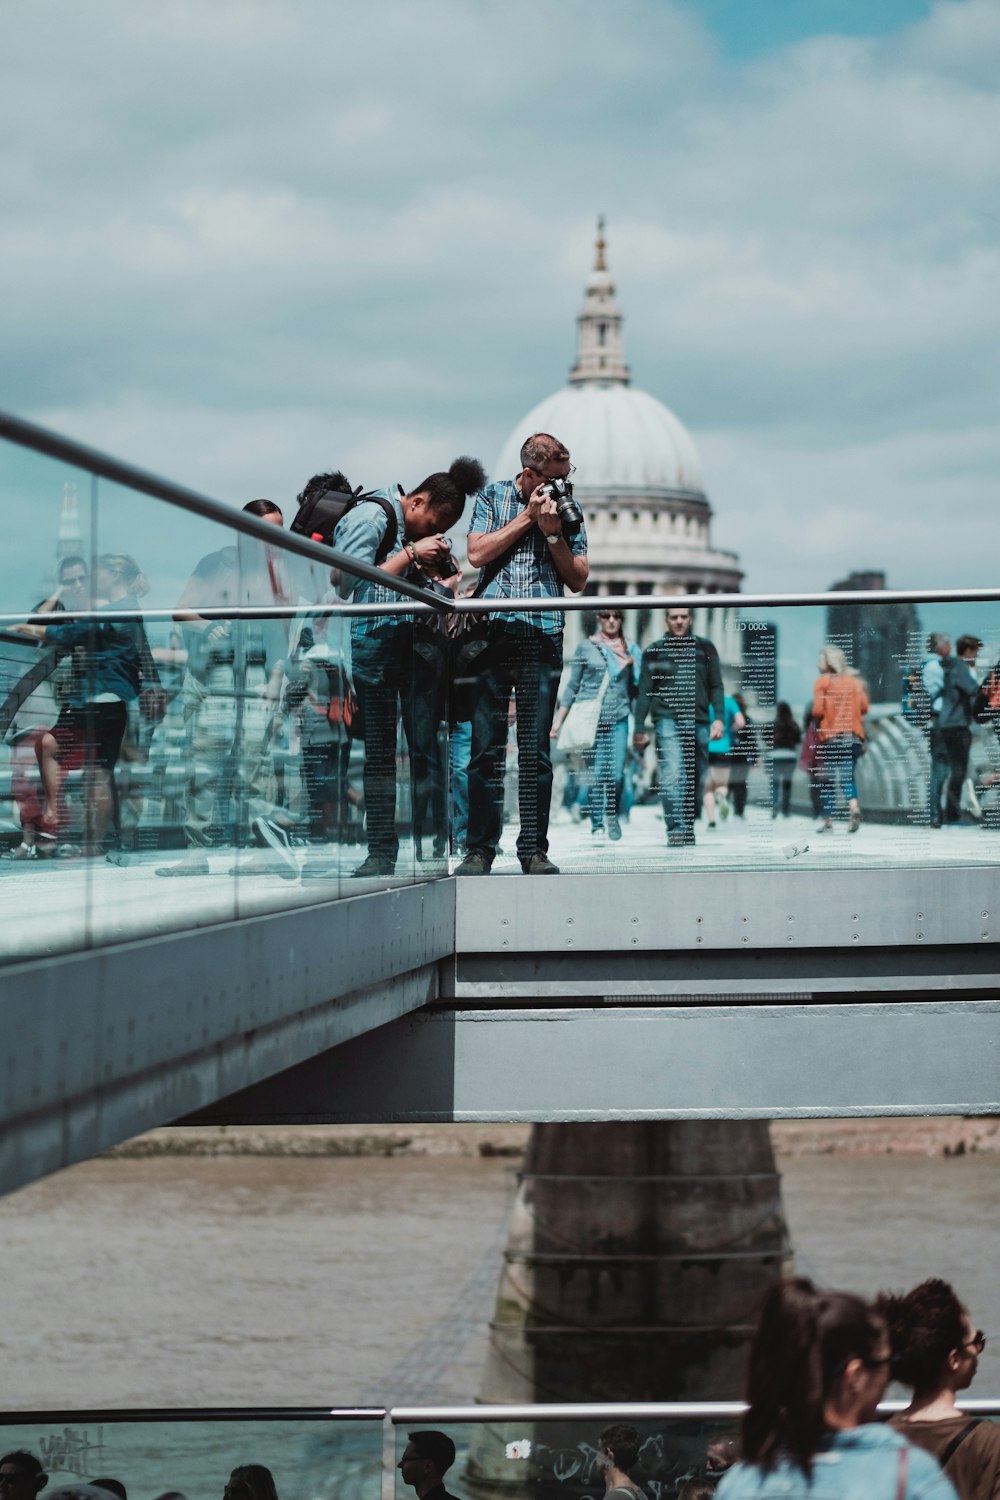 people standing over railings taking a photo